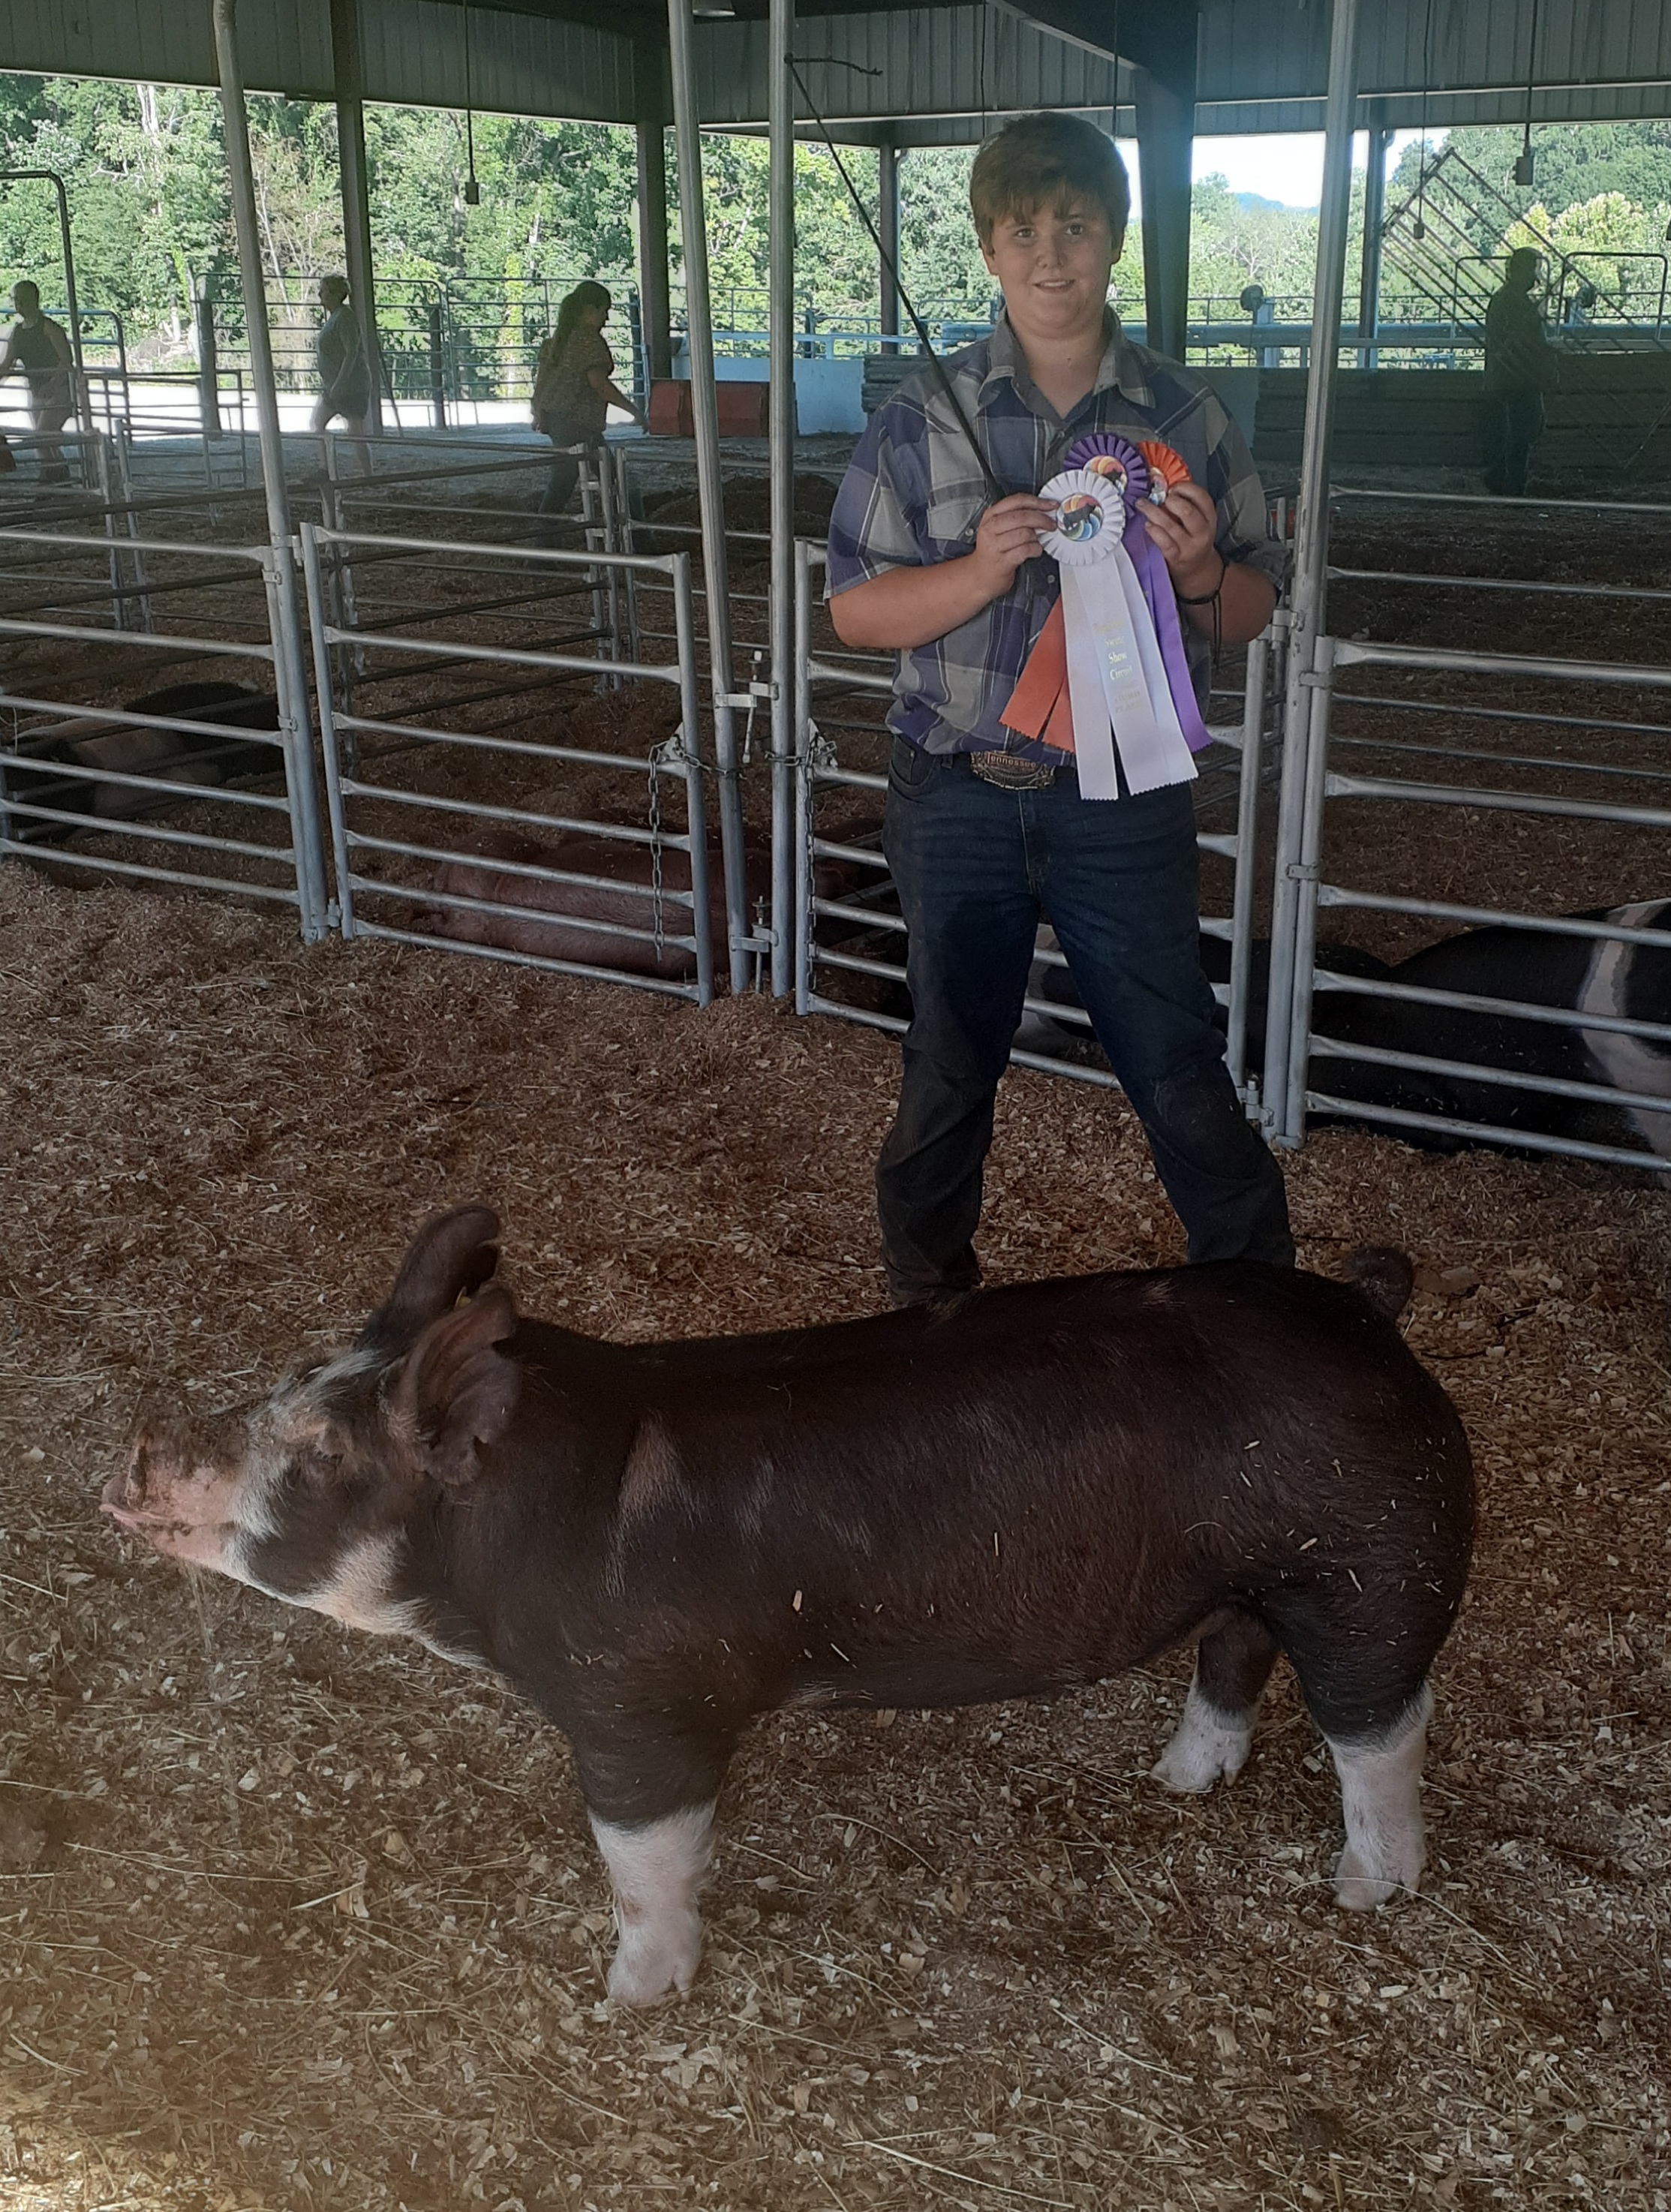 Tylan Lusk
2022 Summertime Classic
Champion Berkshire Barrow 
Open Show
Champion Berkshire Barrow 
TN Bred Show
4th Overall TN Bred Purebred Barrow